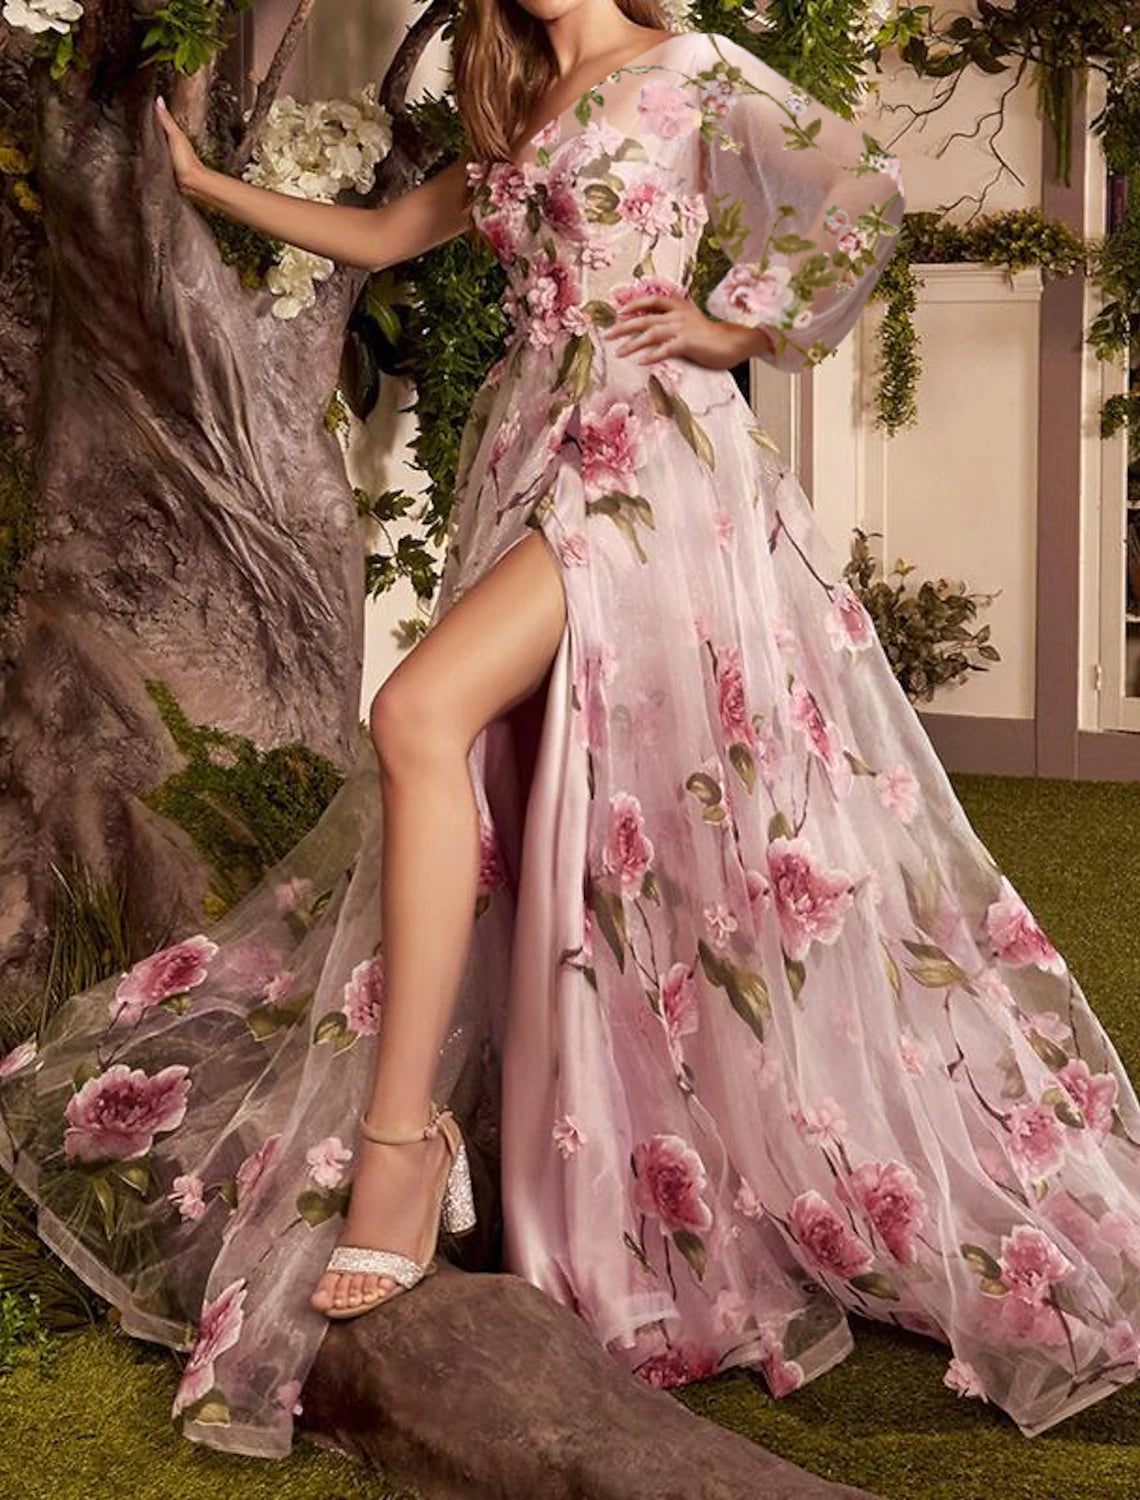 A-Line Prom Dresses Floral Dress Formal Wedding Guest Sweep / Brush Train Long Sleeve One Shoulder Lace with Floral Print